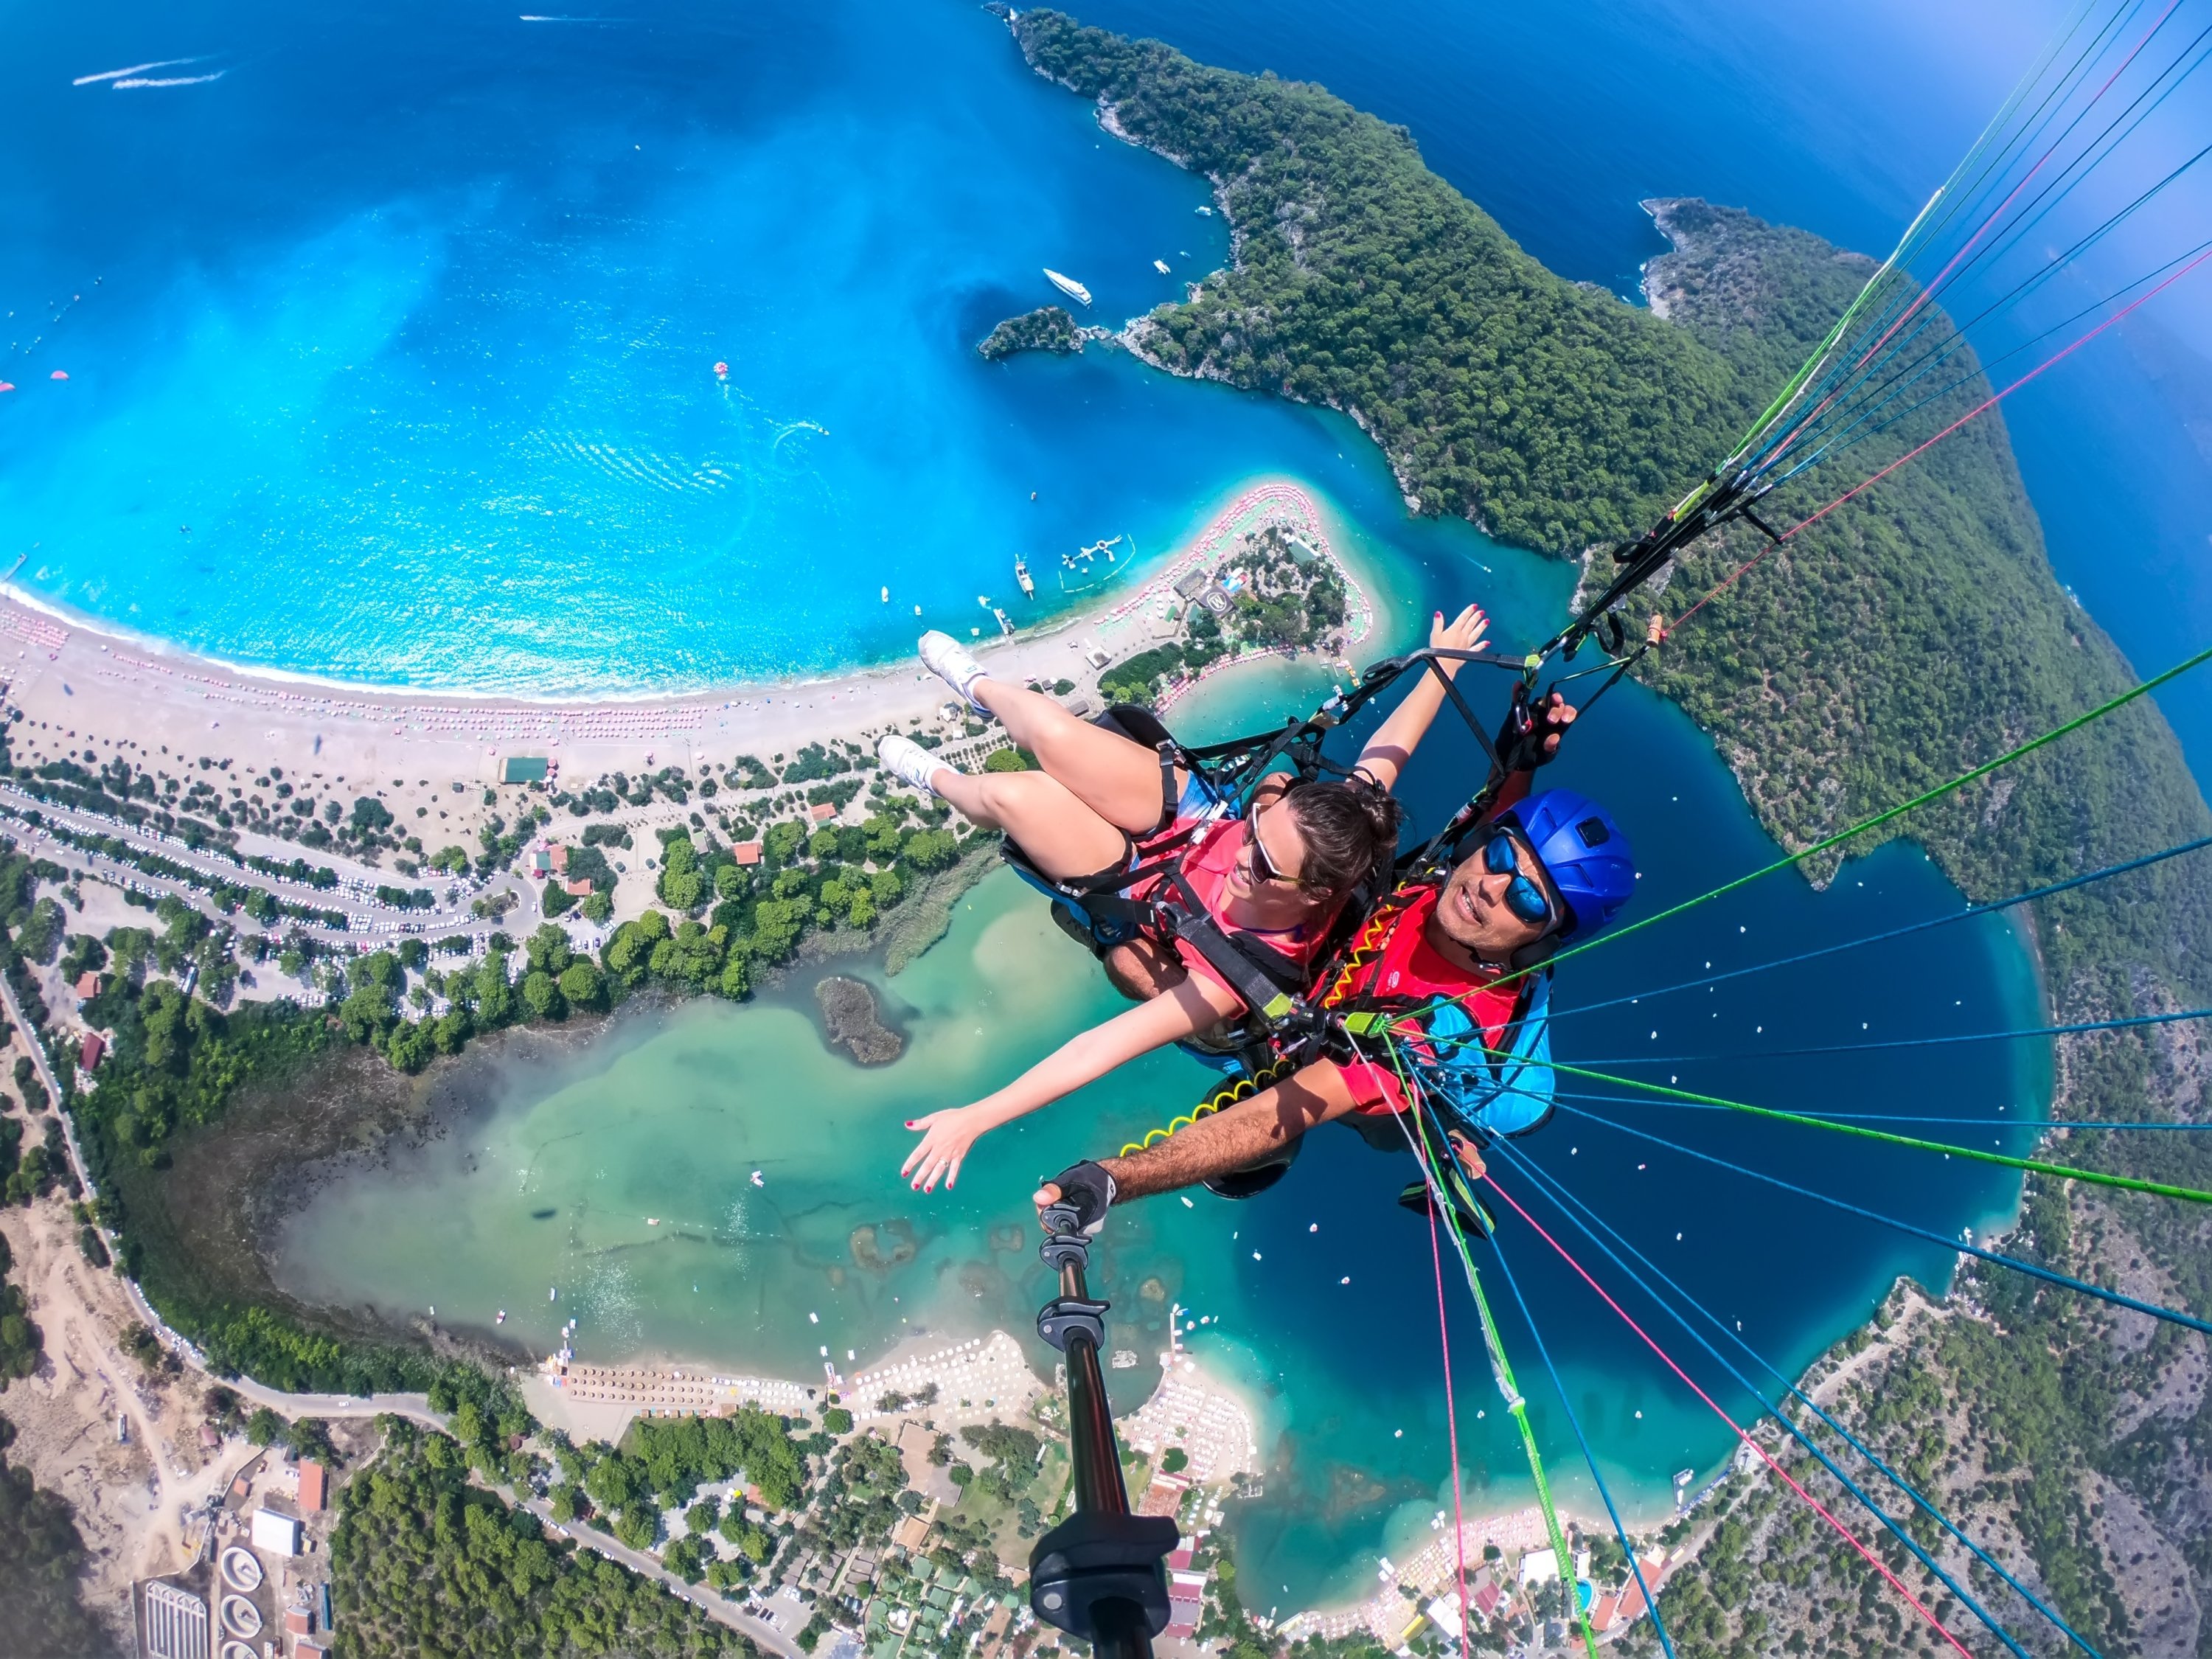 An aerial view of a paraglider and blue lagoon in Öludeniz, Fethiye, Muğla, Turkey, Aug. 4, 2018. (Shutterstock Photo)